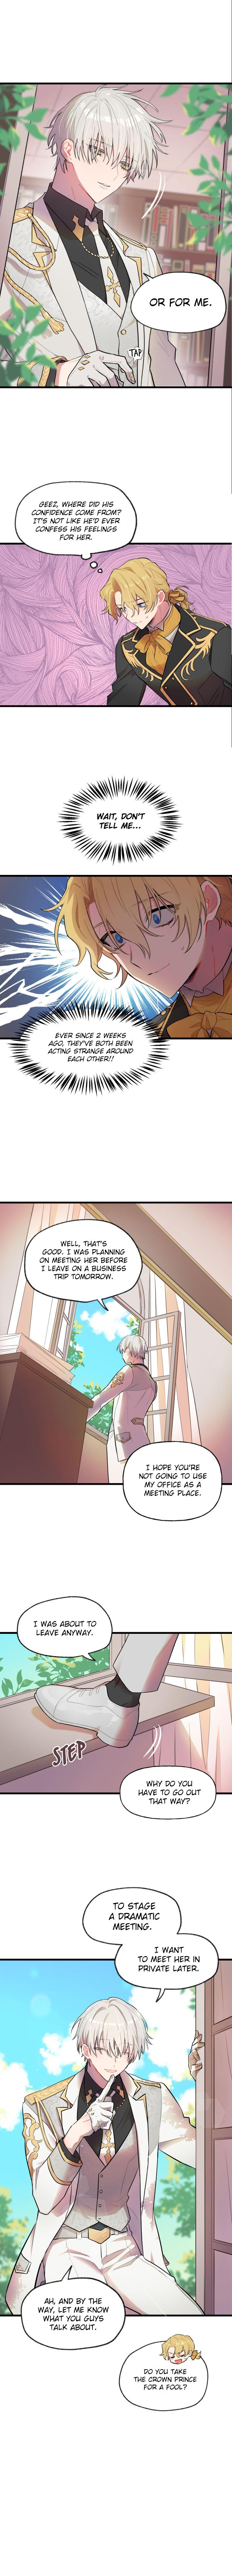 The Baby Isn't Yours Chapter 1 page 12 - Mangakakalot